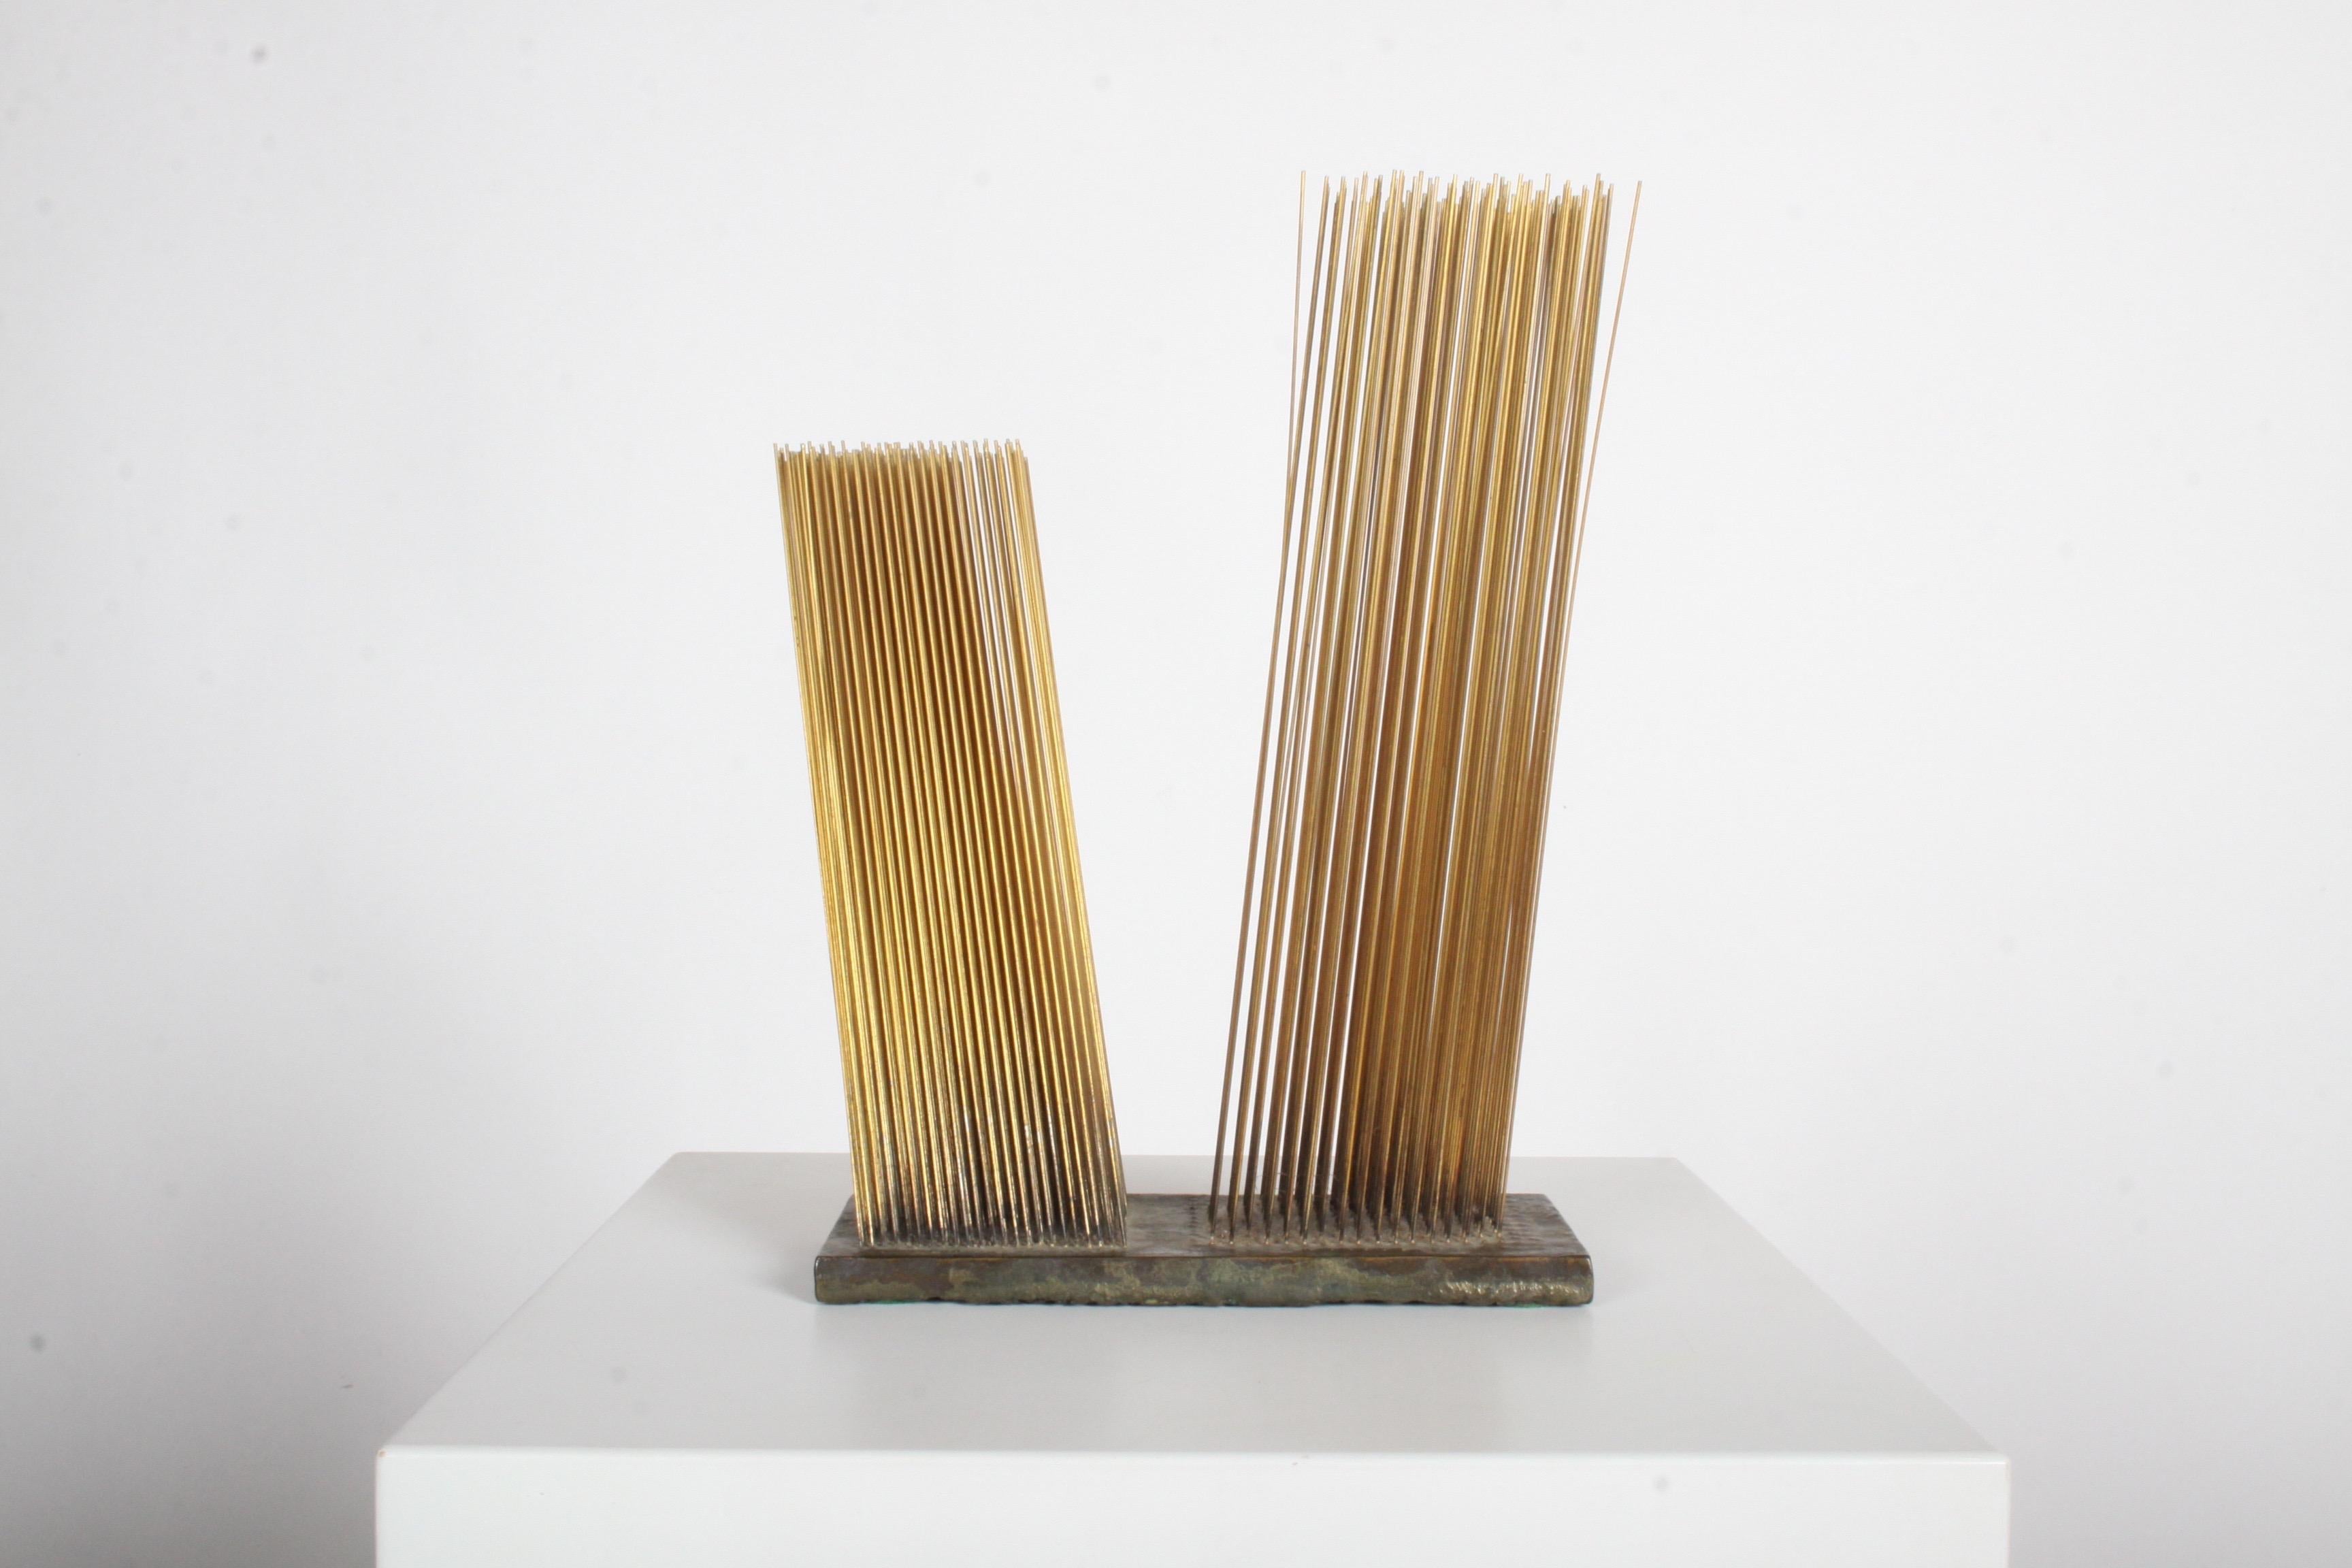 Harry Bertoia gold plated bronze Sonambient sculpture, diagonal double tonal, circa 1965.
Two groupings of thin rods at different angles on poured slab of bronze. Purchased from estate of the original owner. Sold with a “Certificate of